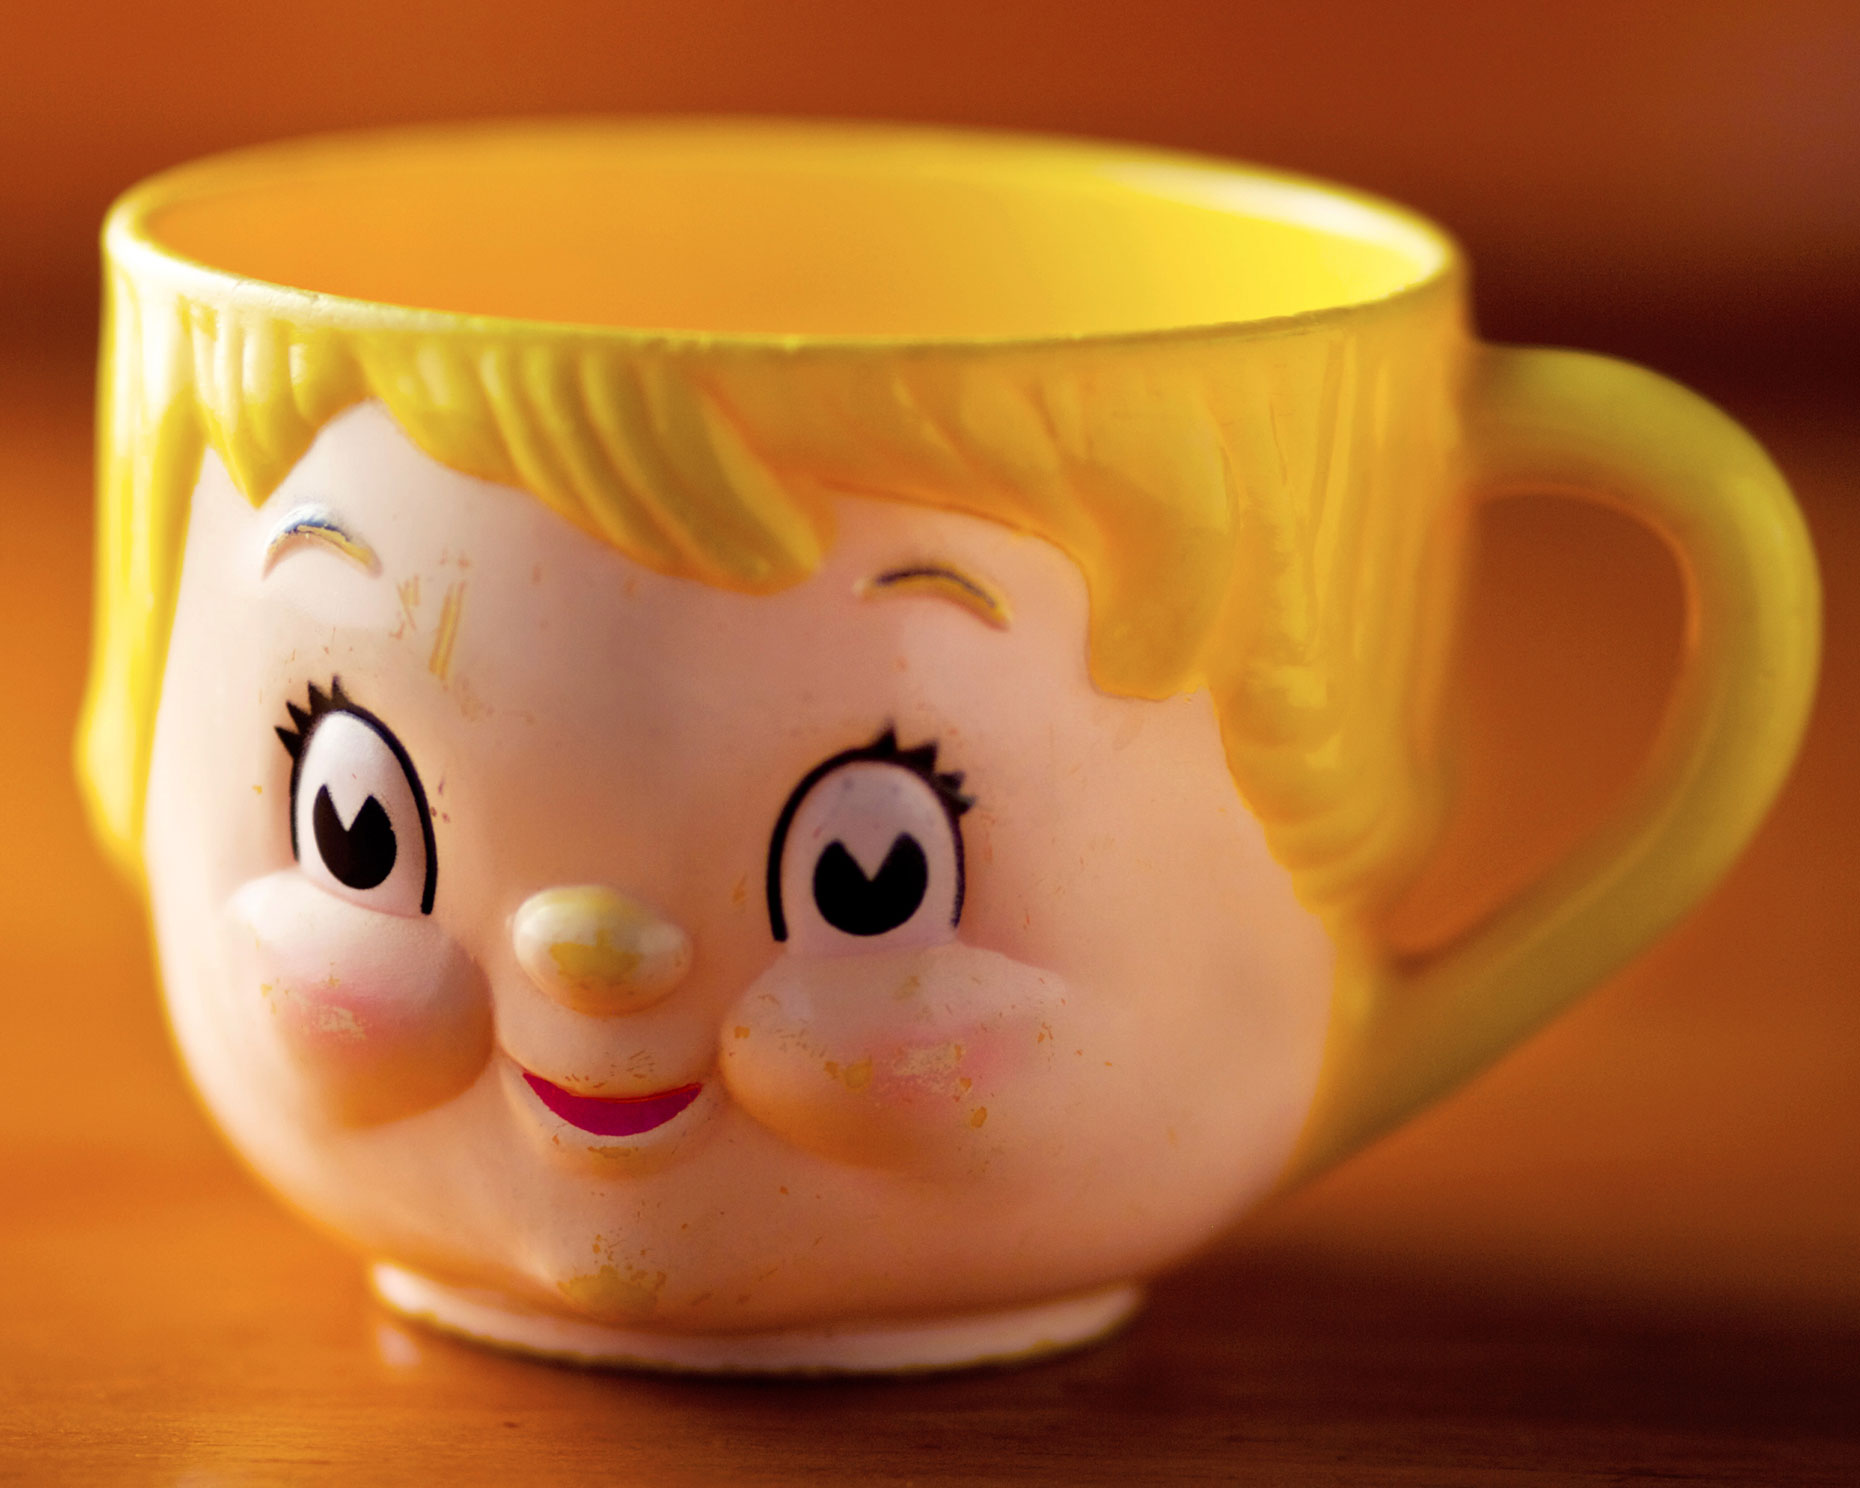 Still life of an old baby cup.